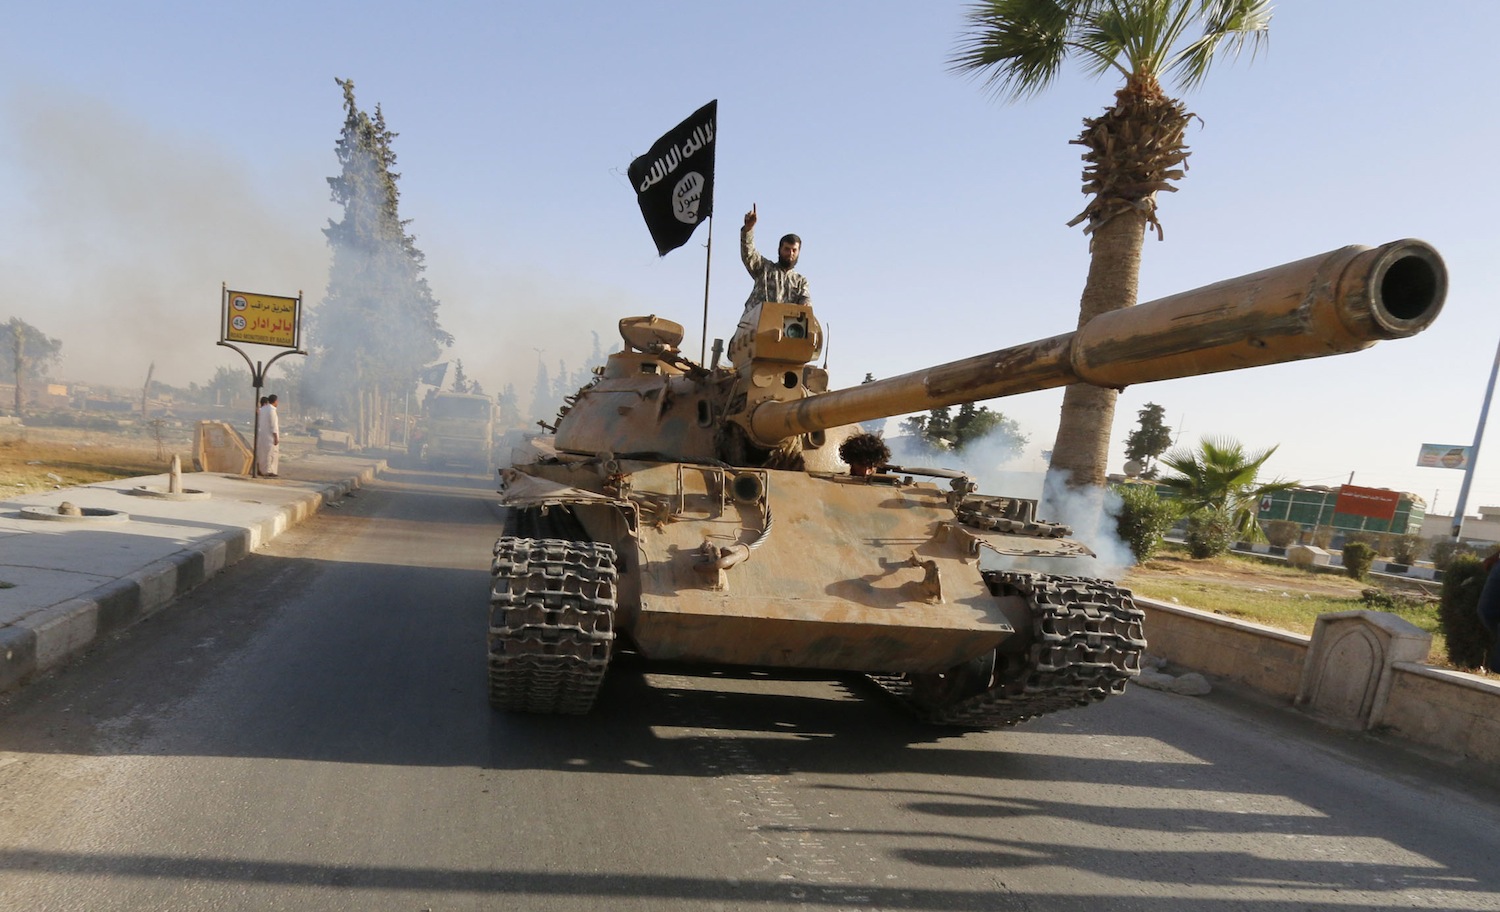 No, ISIS Is Not a Threat to the US